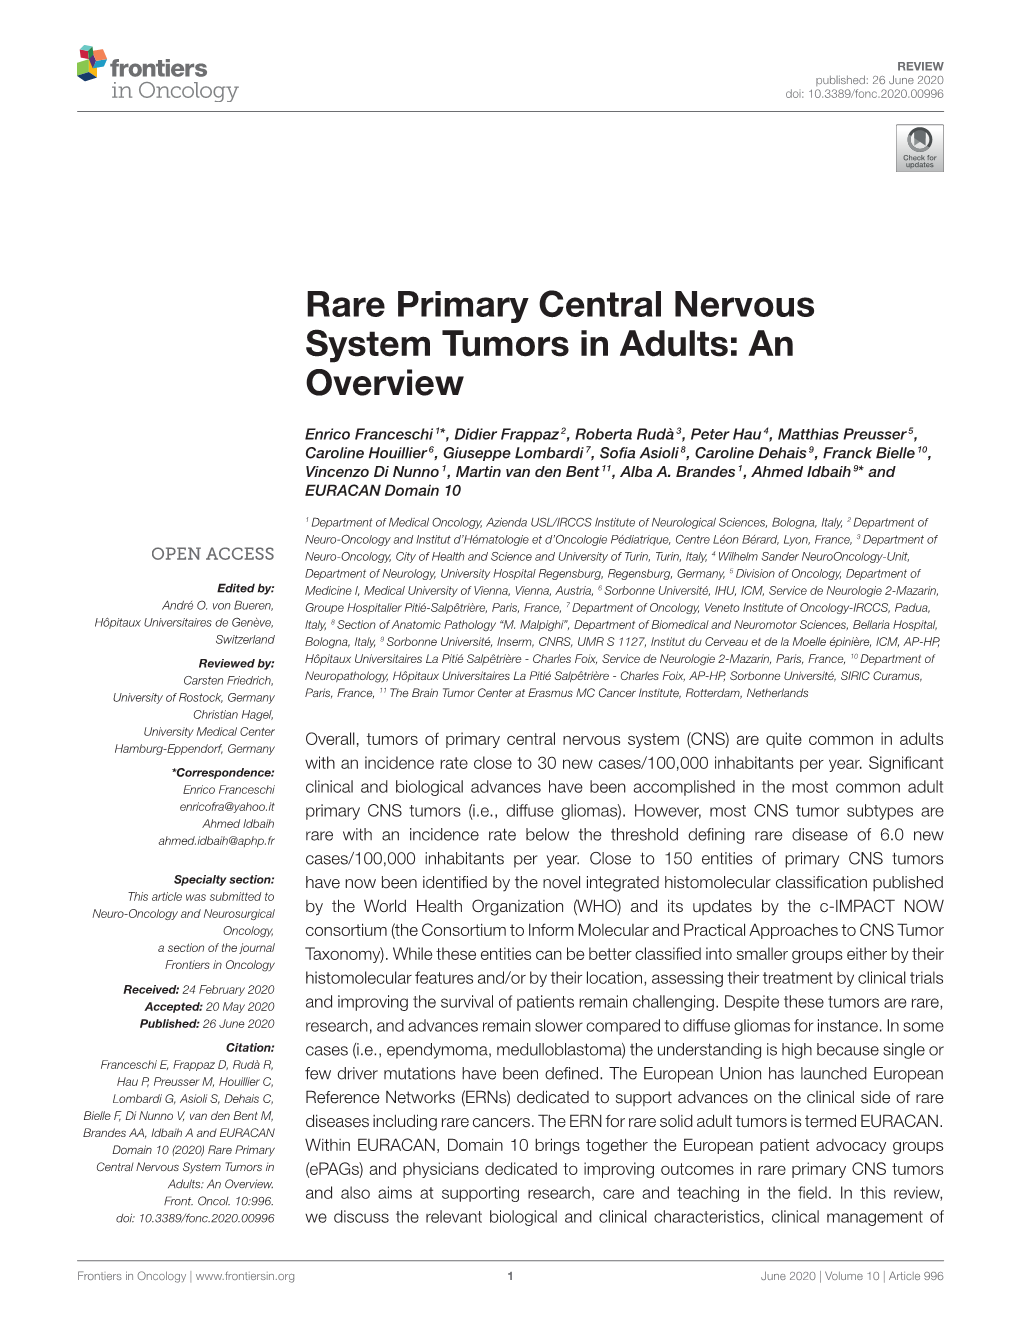 Rare Primary Central Nervous System Tumors in Adults: an Overview